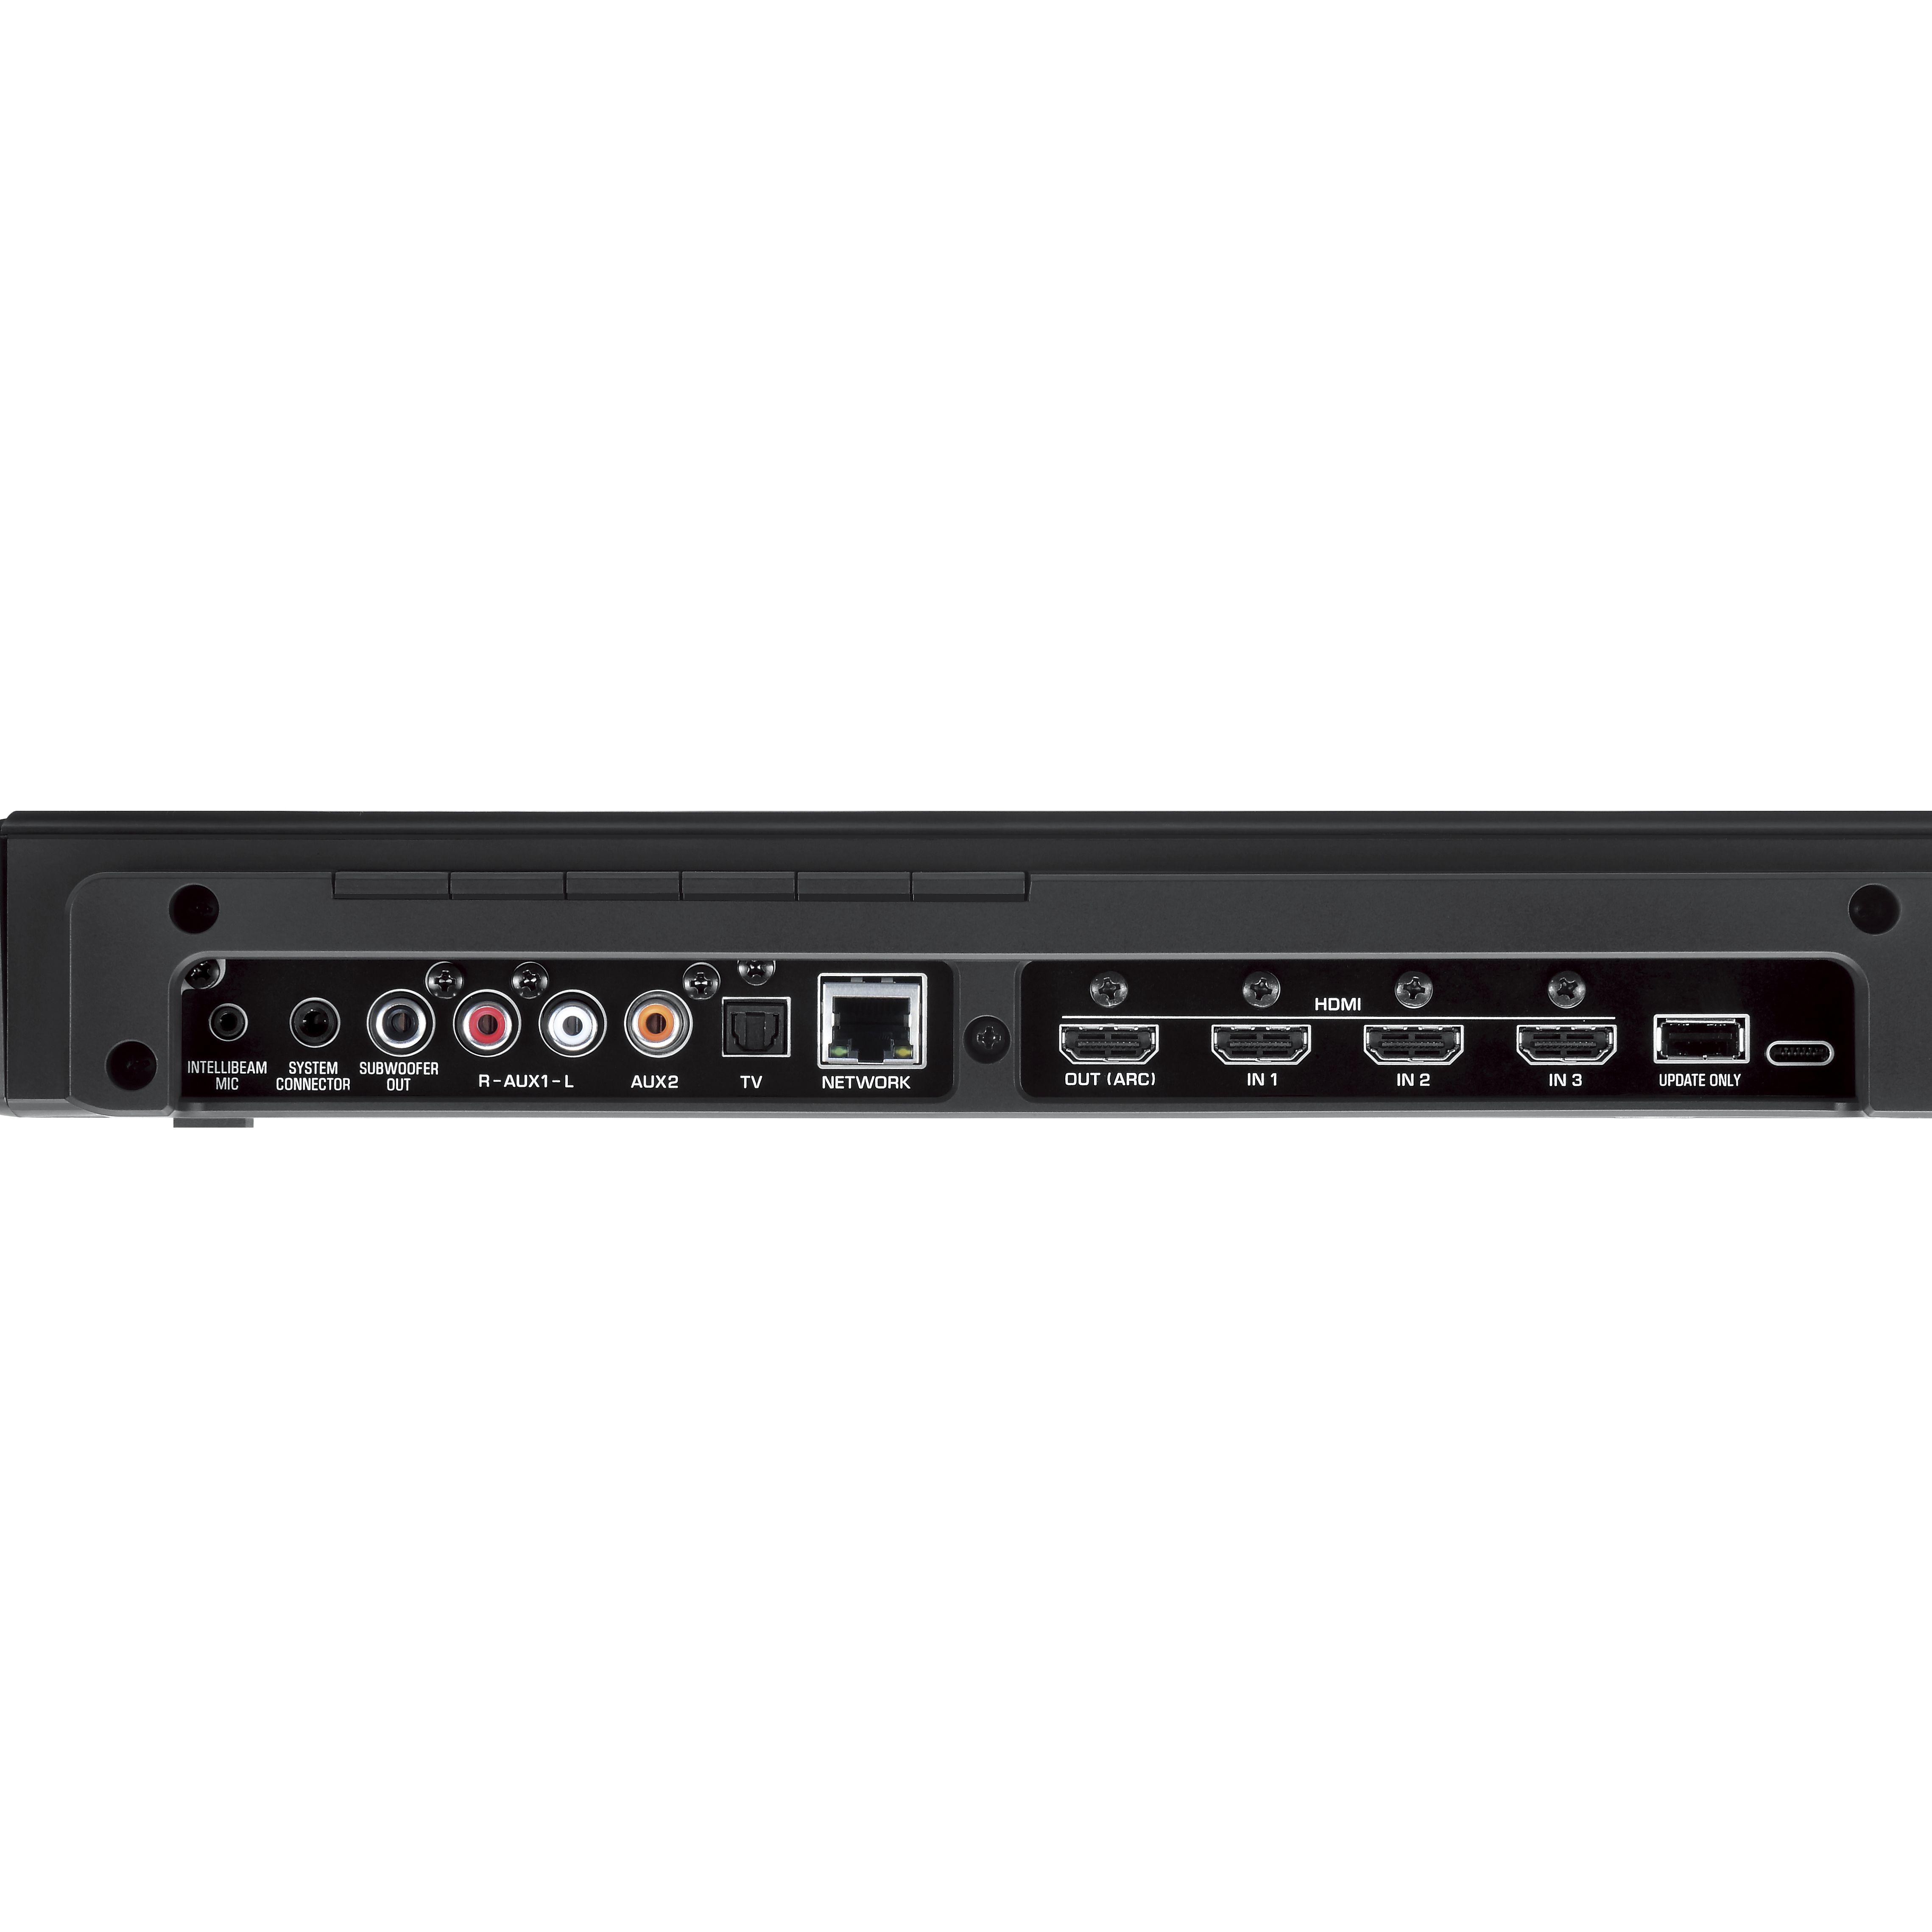 YSP-2700 - Overview - Sound Bars - Audio & Visual - Products 